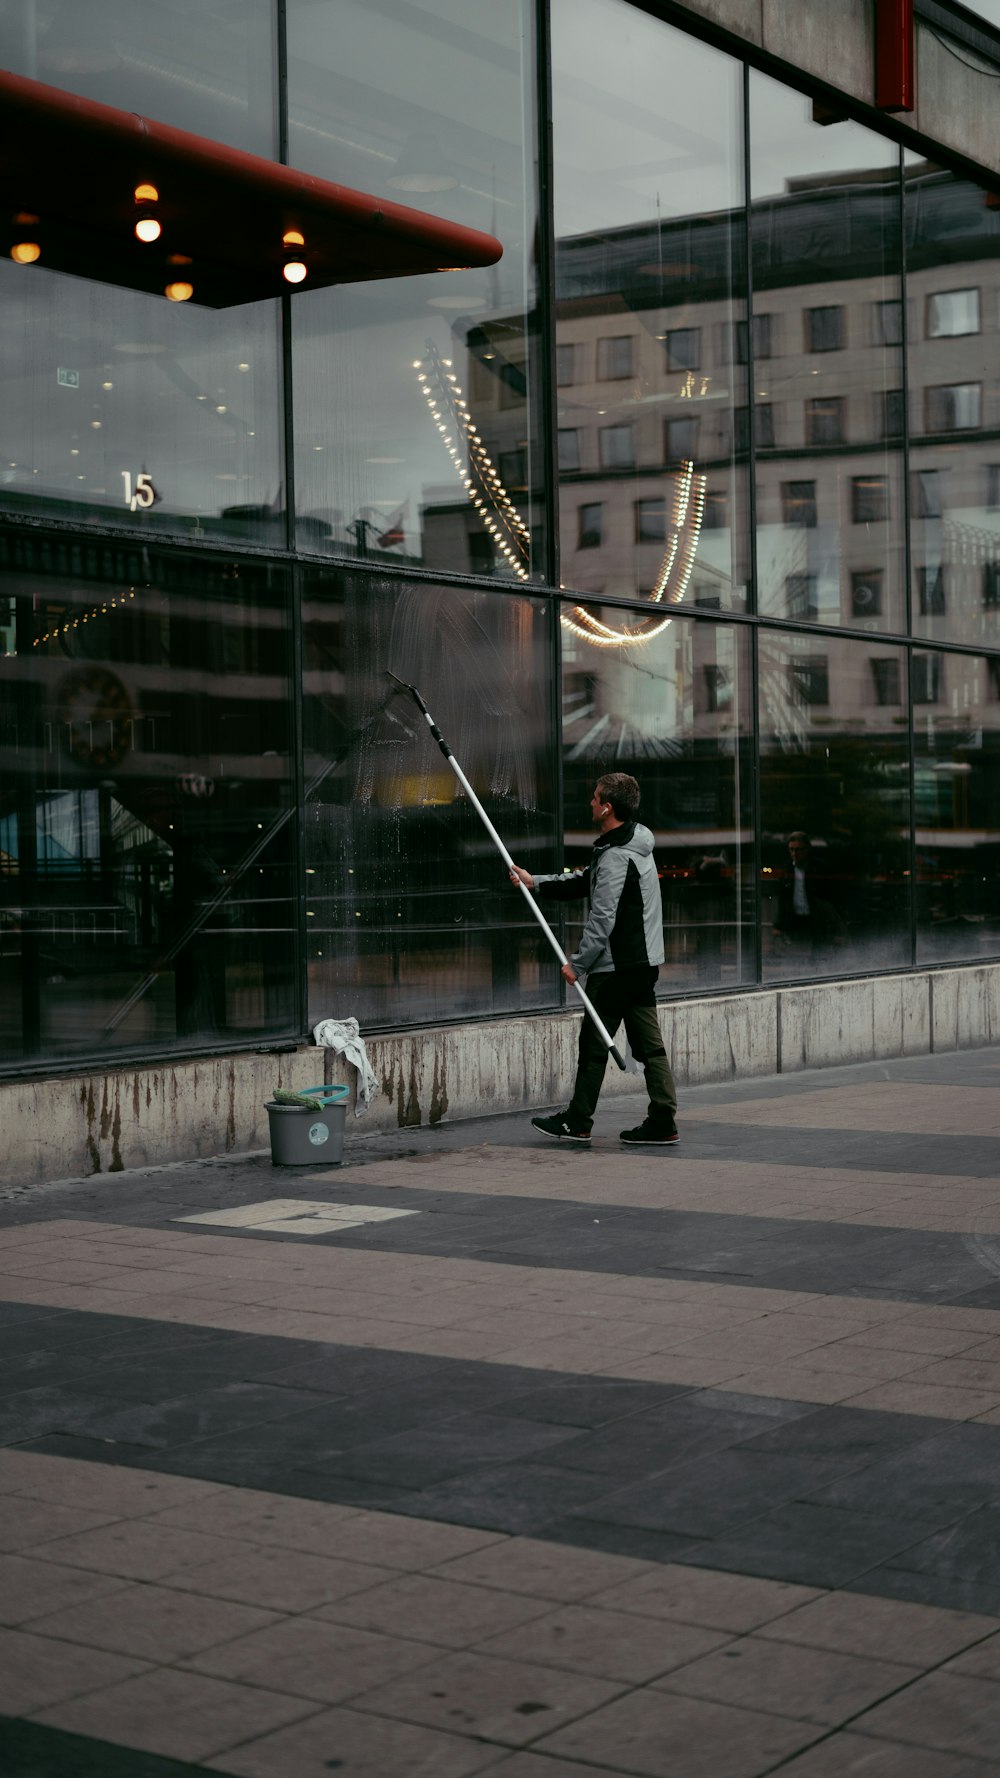 a person holding a large metal pole in front of a building